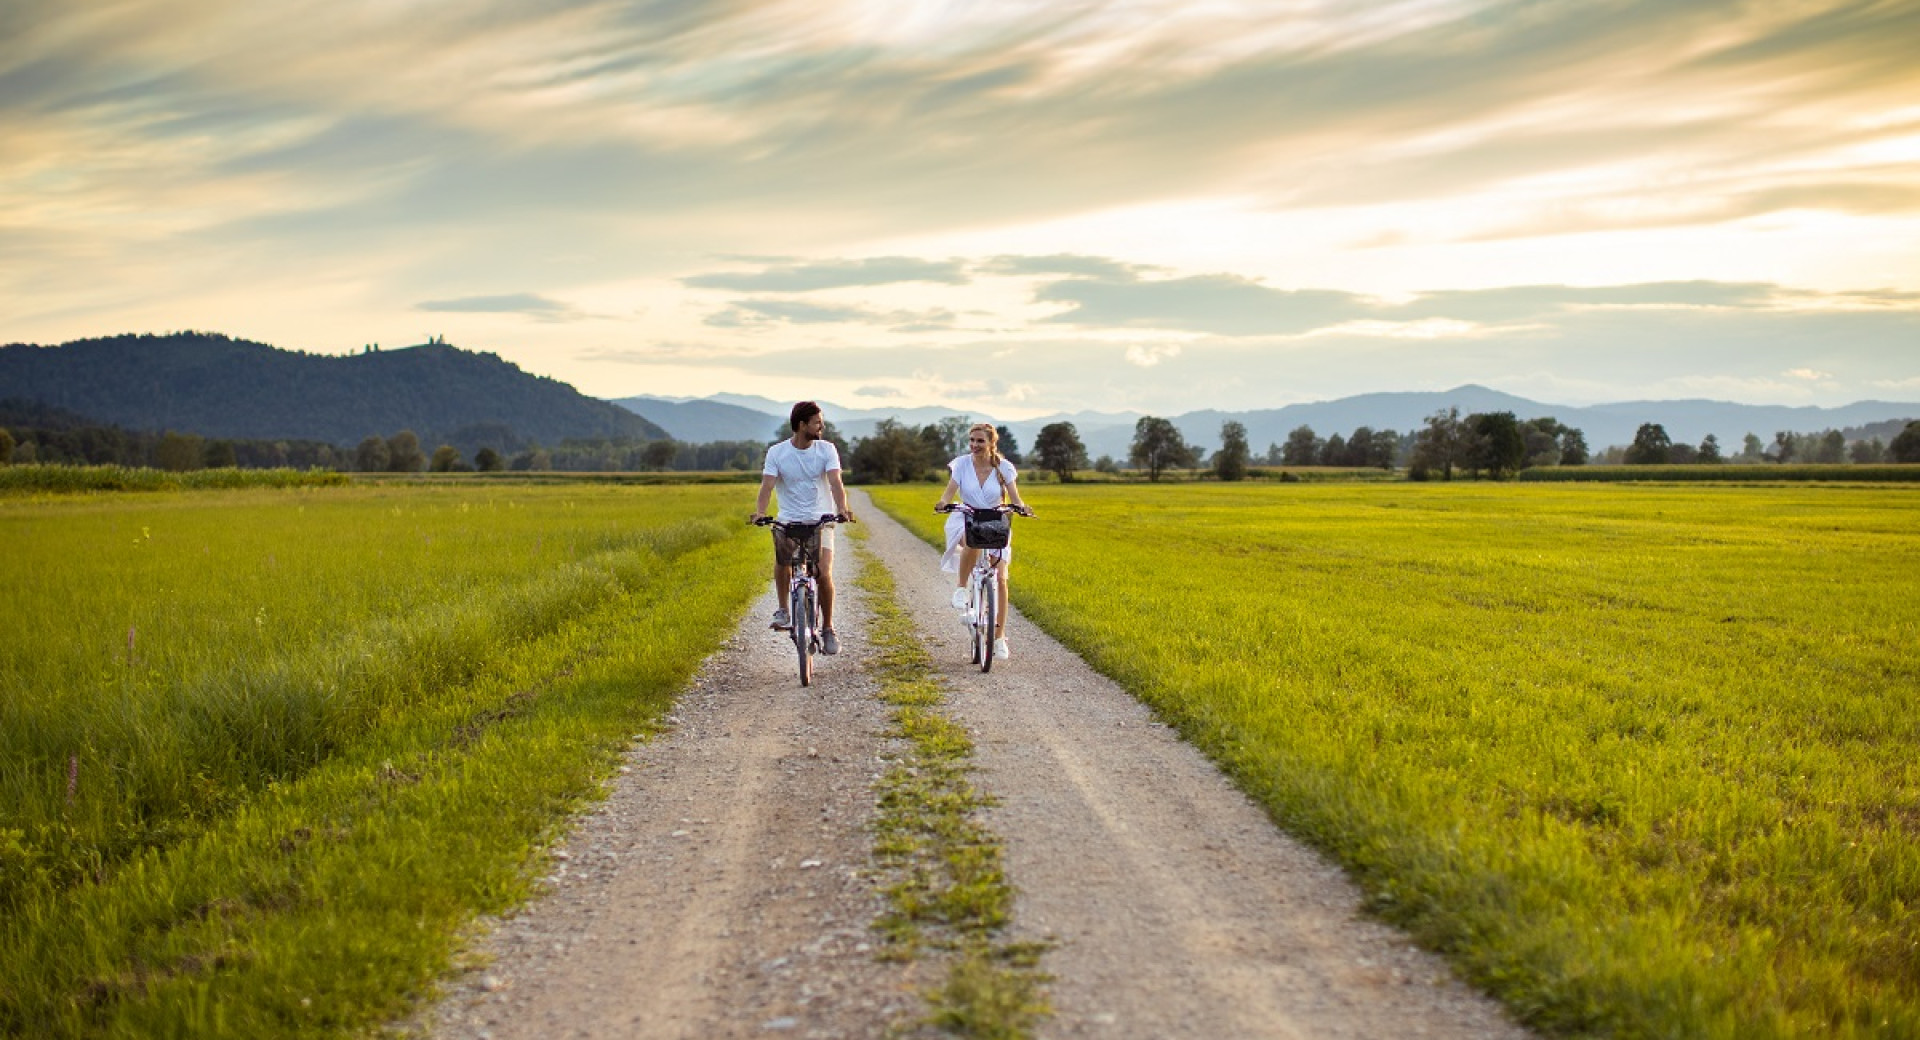 Two people cycling on an unpaved road with a green surroundings.